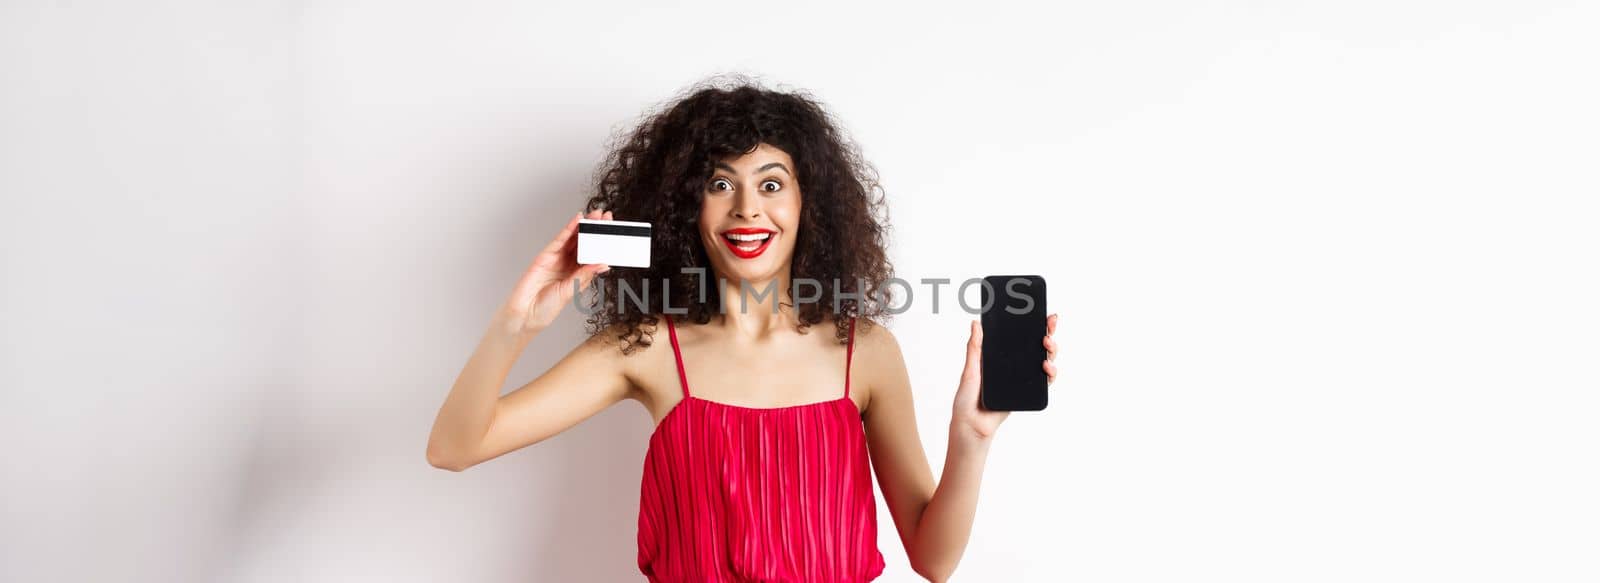 Online shopping concept. Excited curly-haired woman in red dress showing empty smartphone screen and plastic credit card, smiling happy at camera, standing on white background.